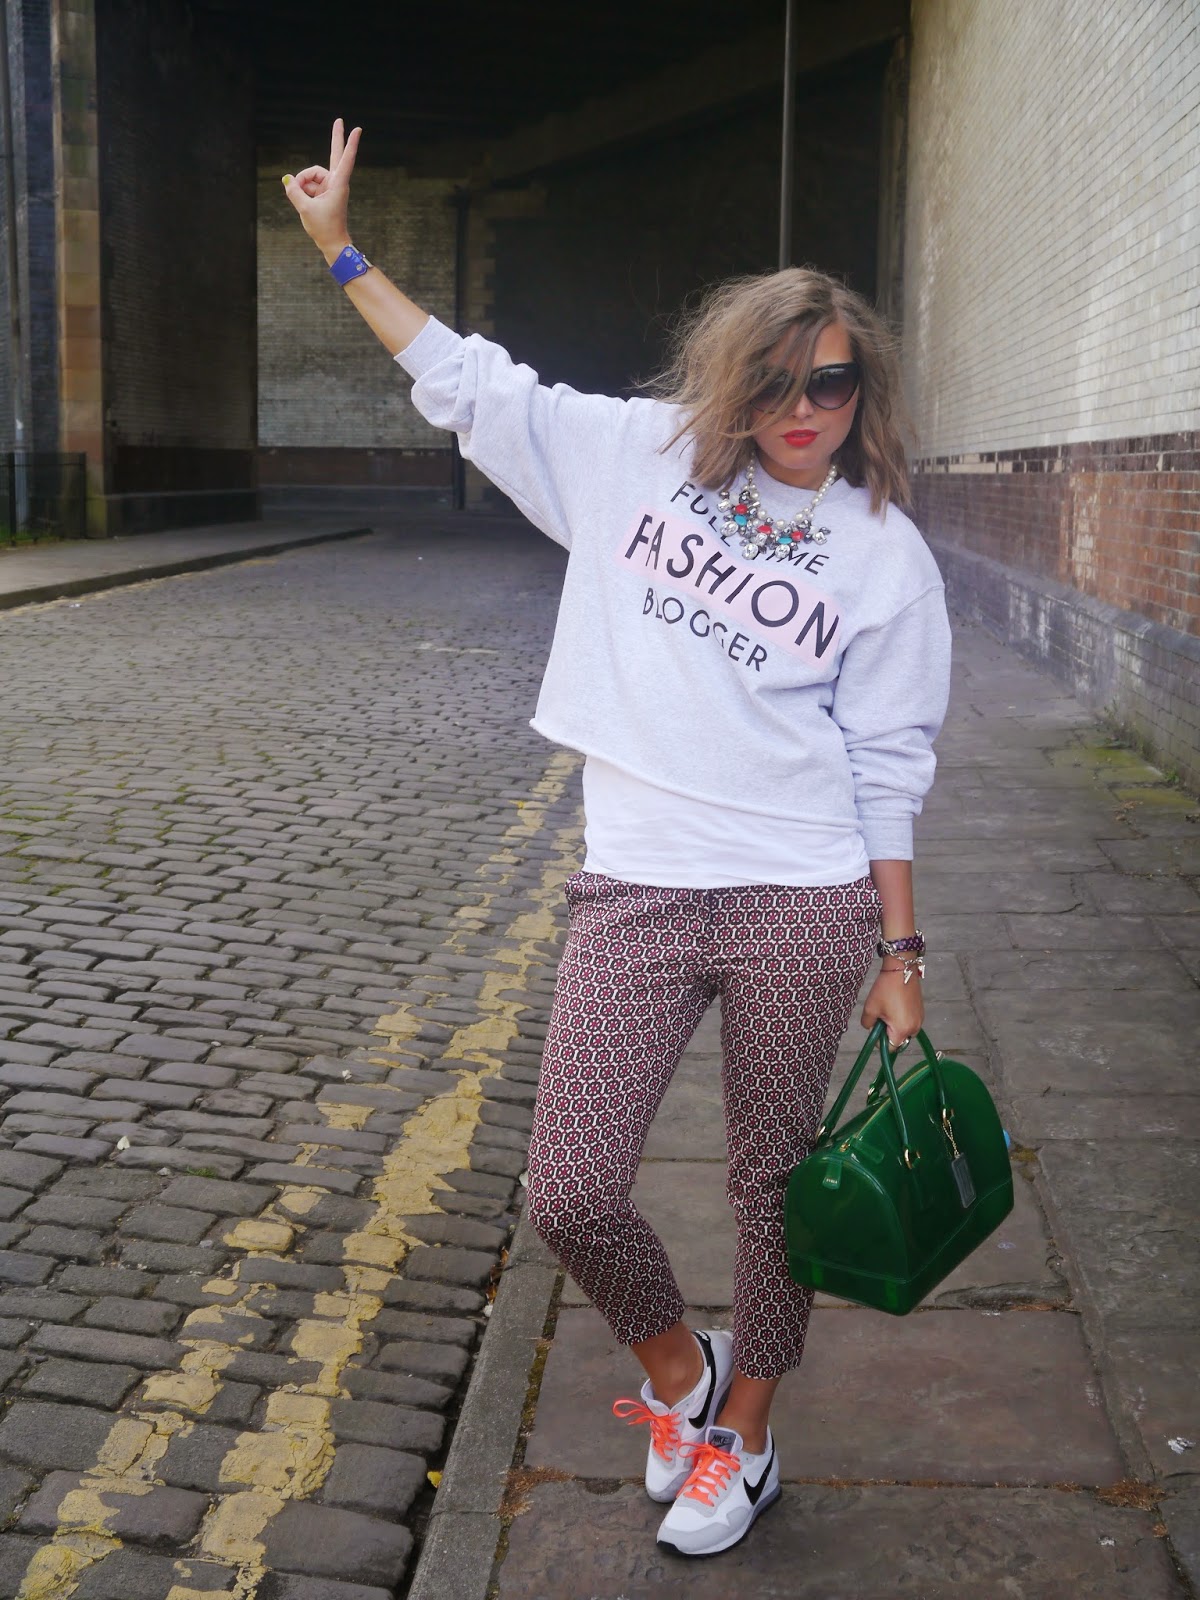 Full Time Fashion Blogger jumper  by River Island